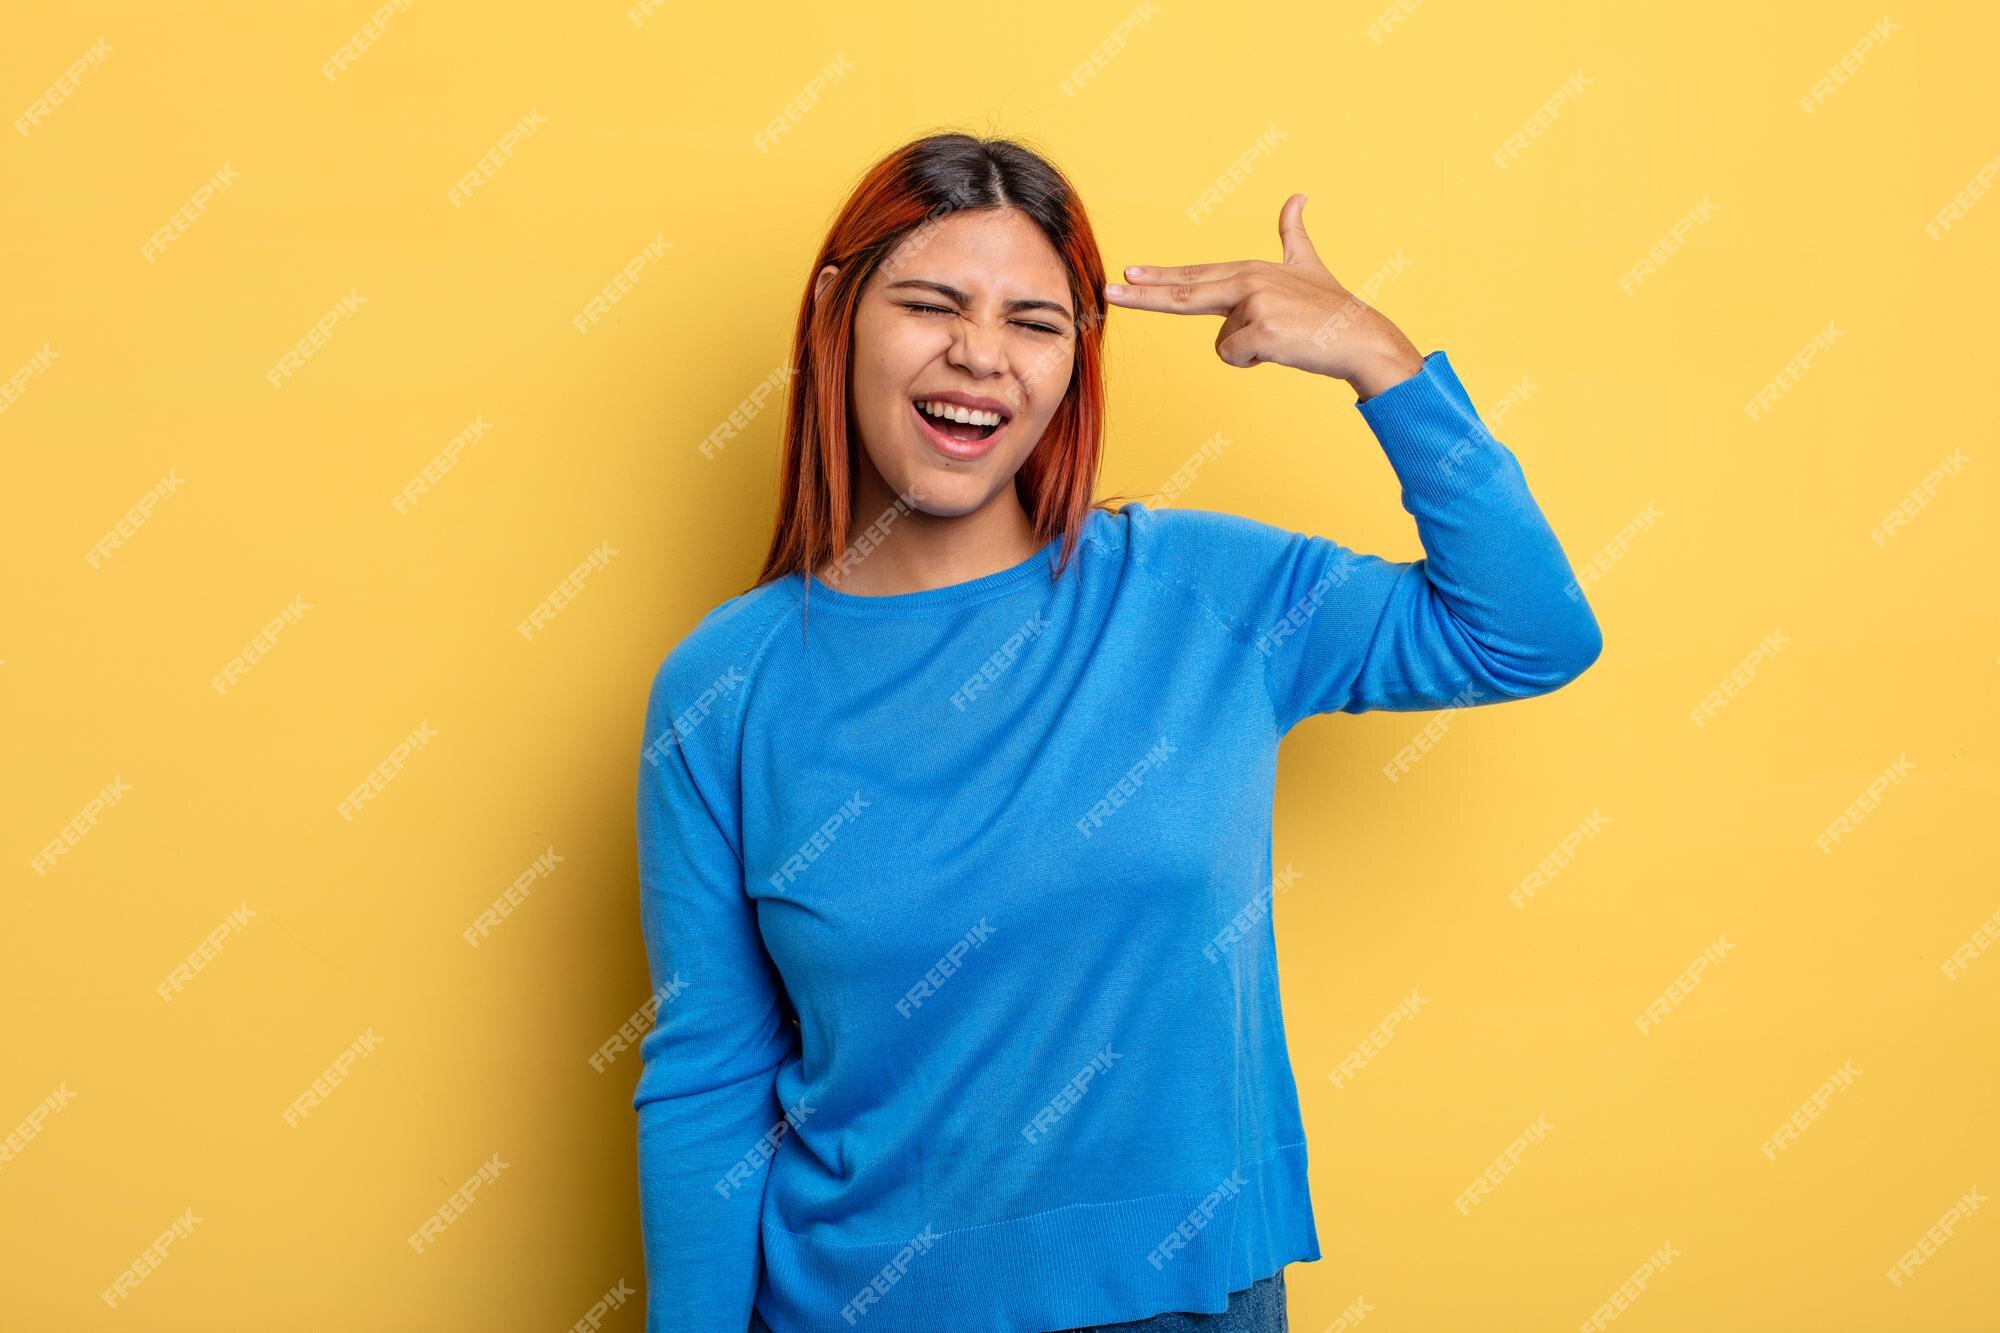 young-hispanic-woman-looking-unhappy-stressed-suicide-gesture-making-gun-sign-with-hand-pointing-head_1194-341502.jpg